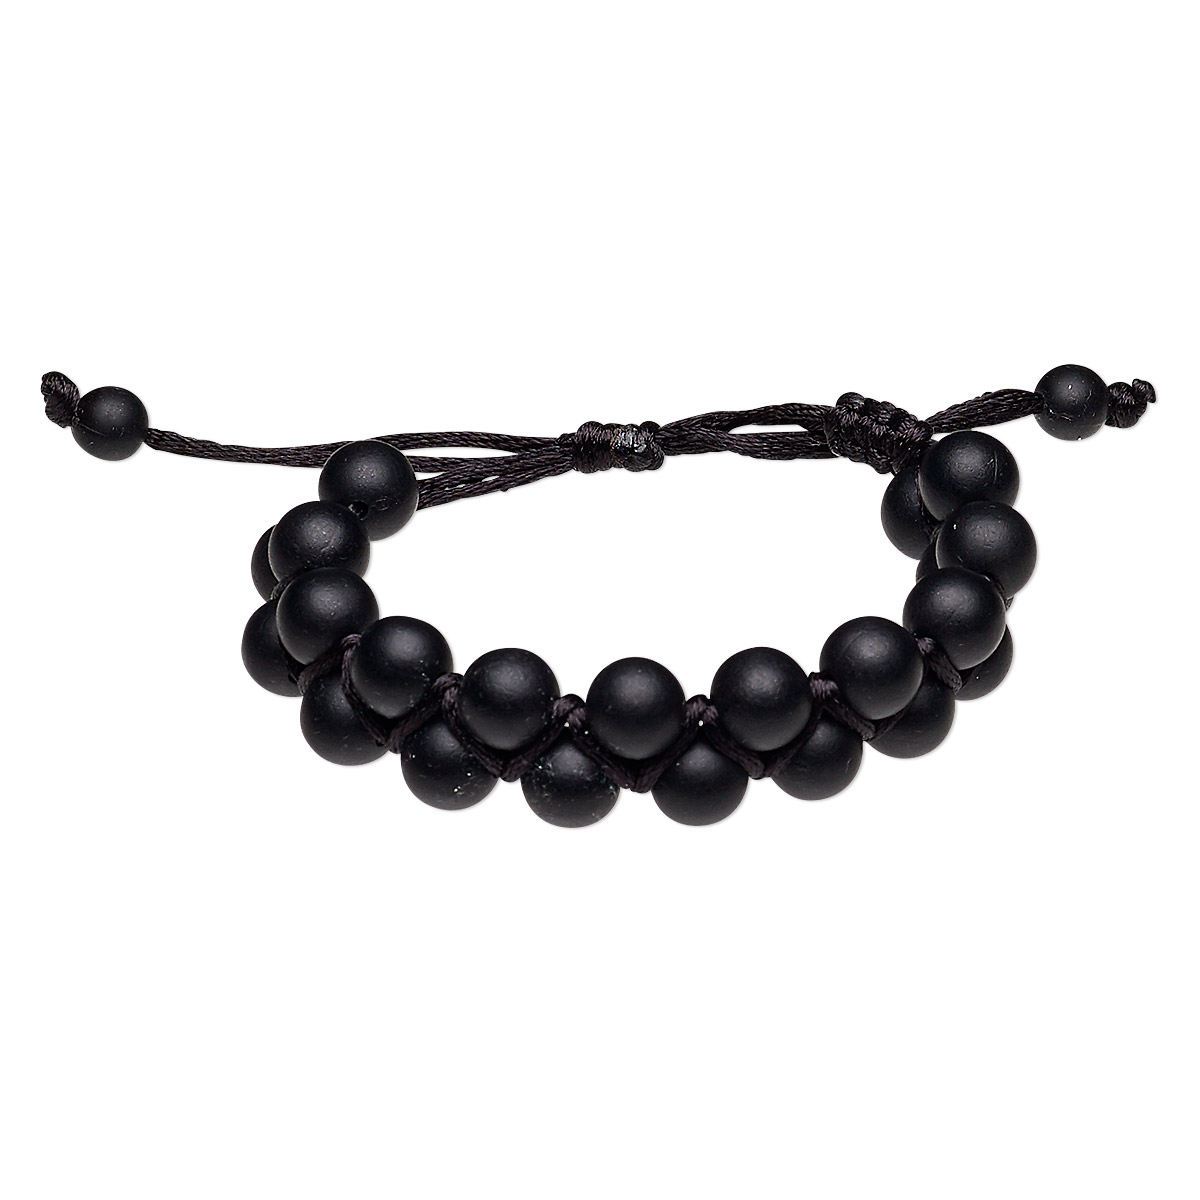 Bracelet, nylon and acrylic, black, 18mm wide with 8mm round ...